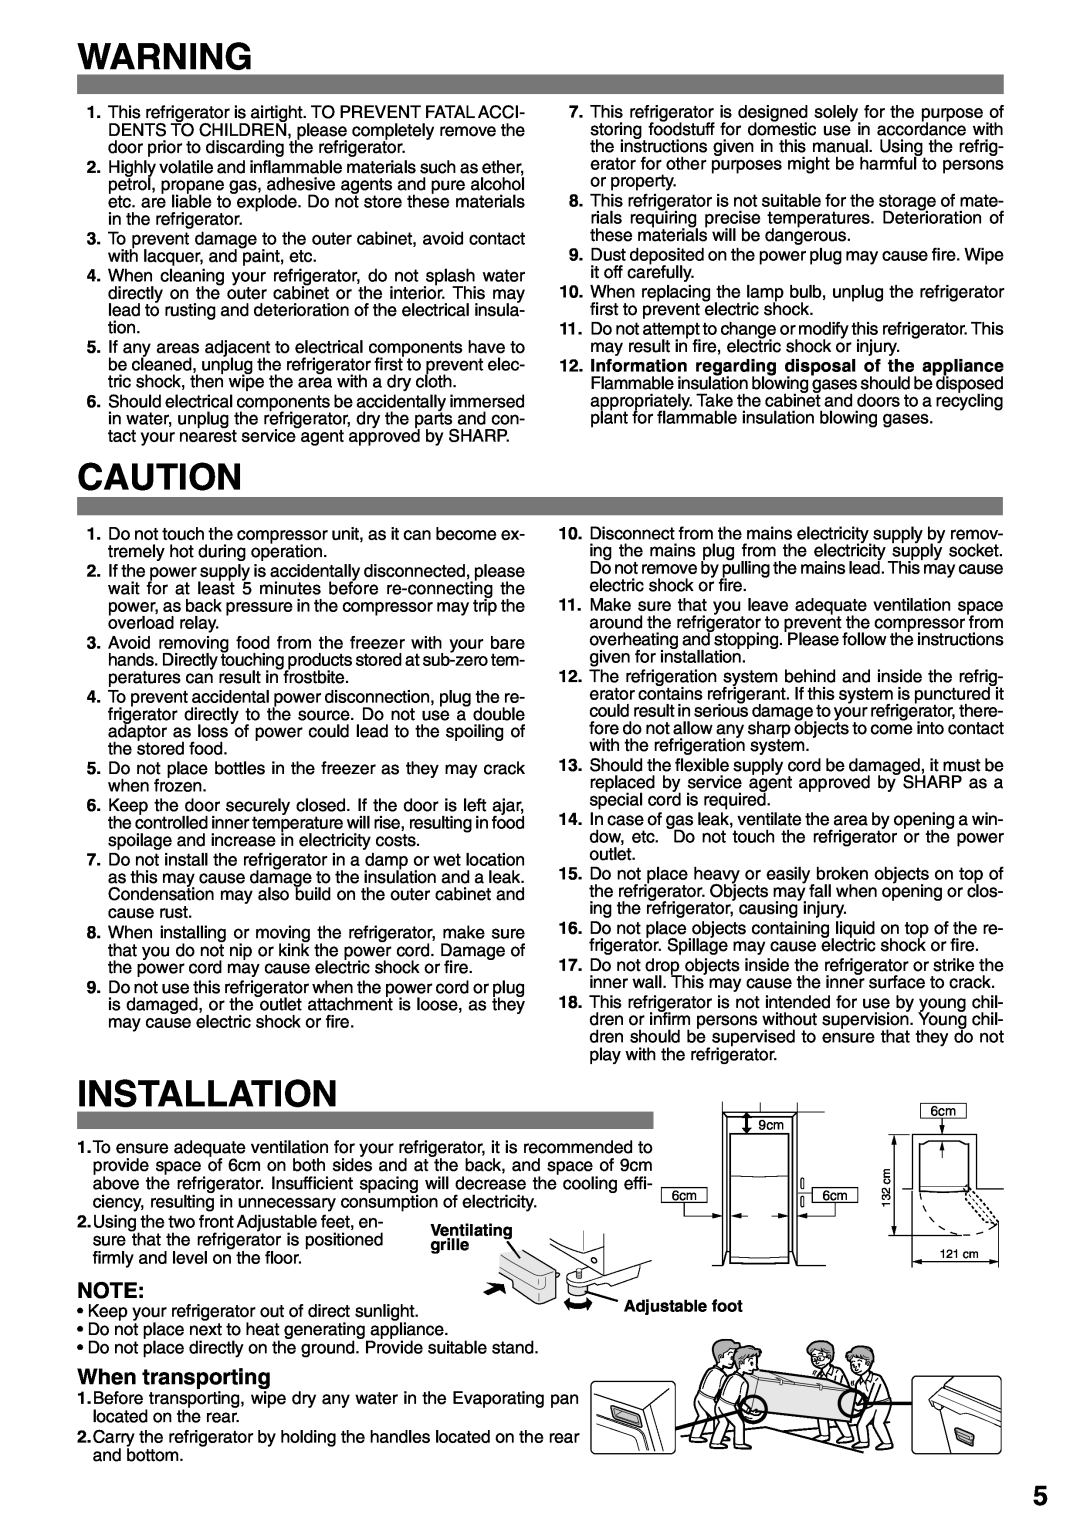 Sharp SJ-47L-A2, SJ-43L-A2 operation manual Installation, When transporting, Keep your refrigerator out of direct sunlight 